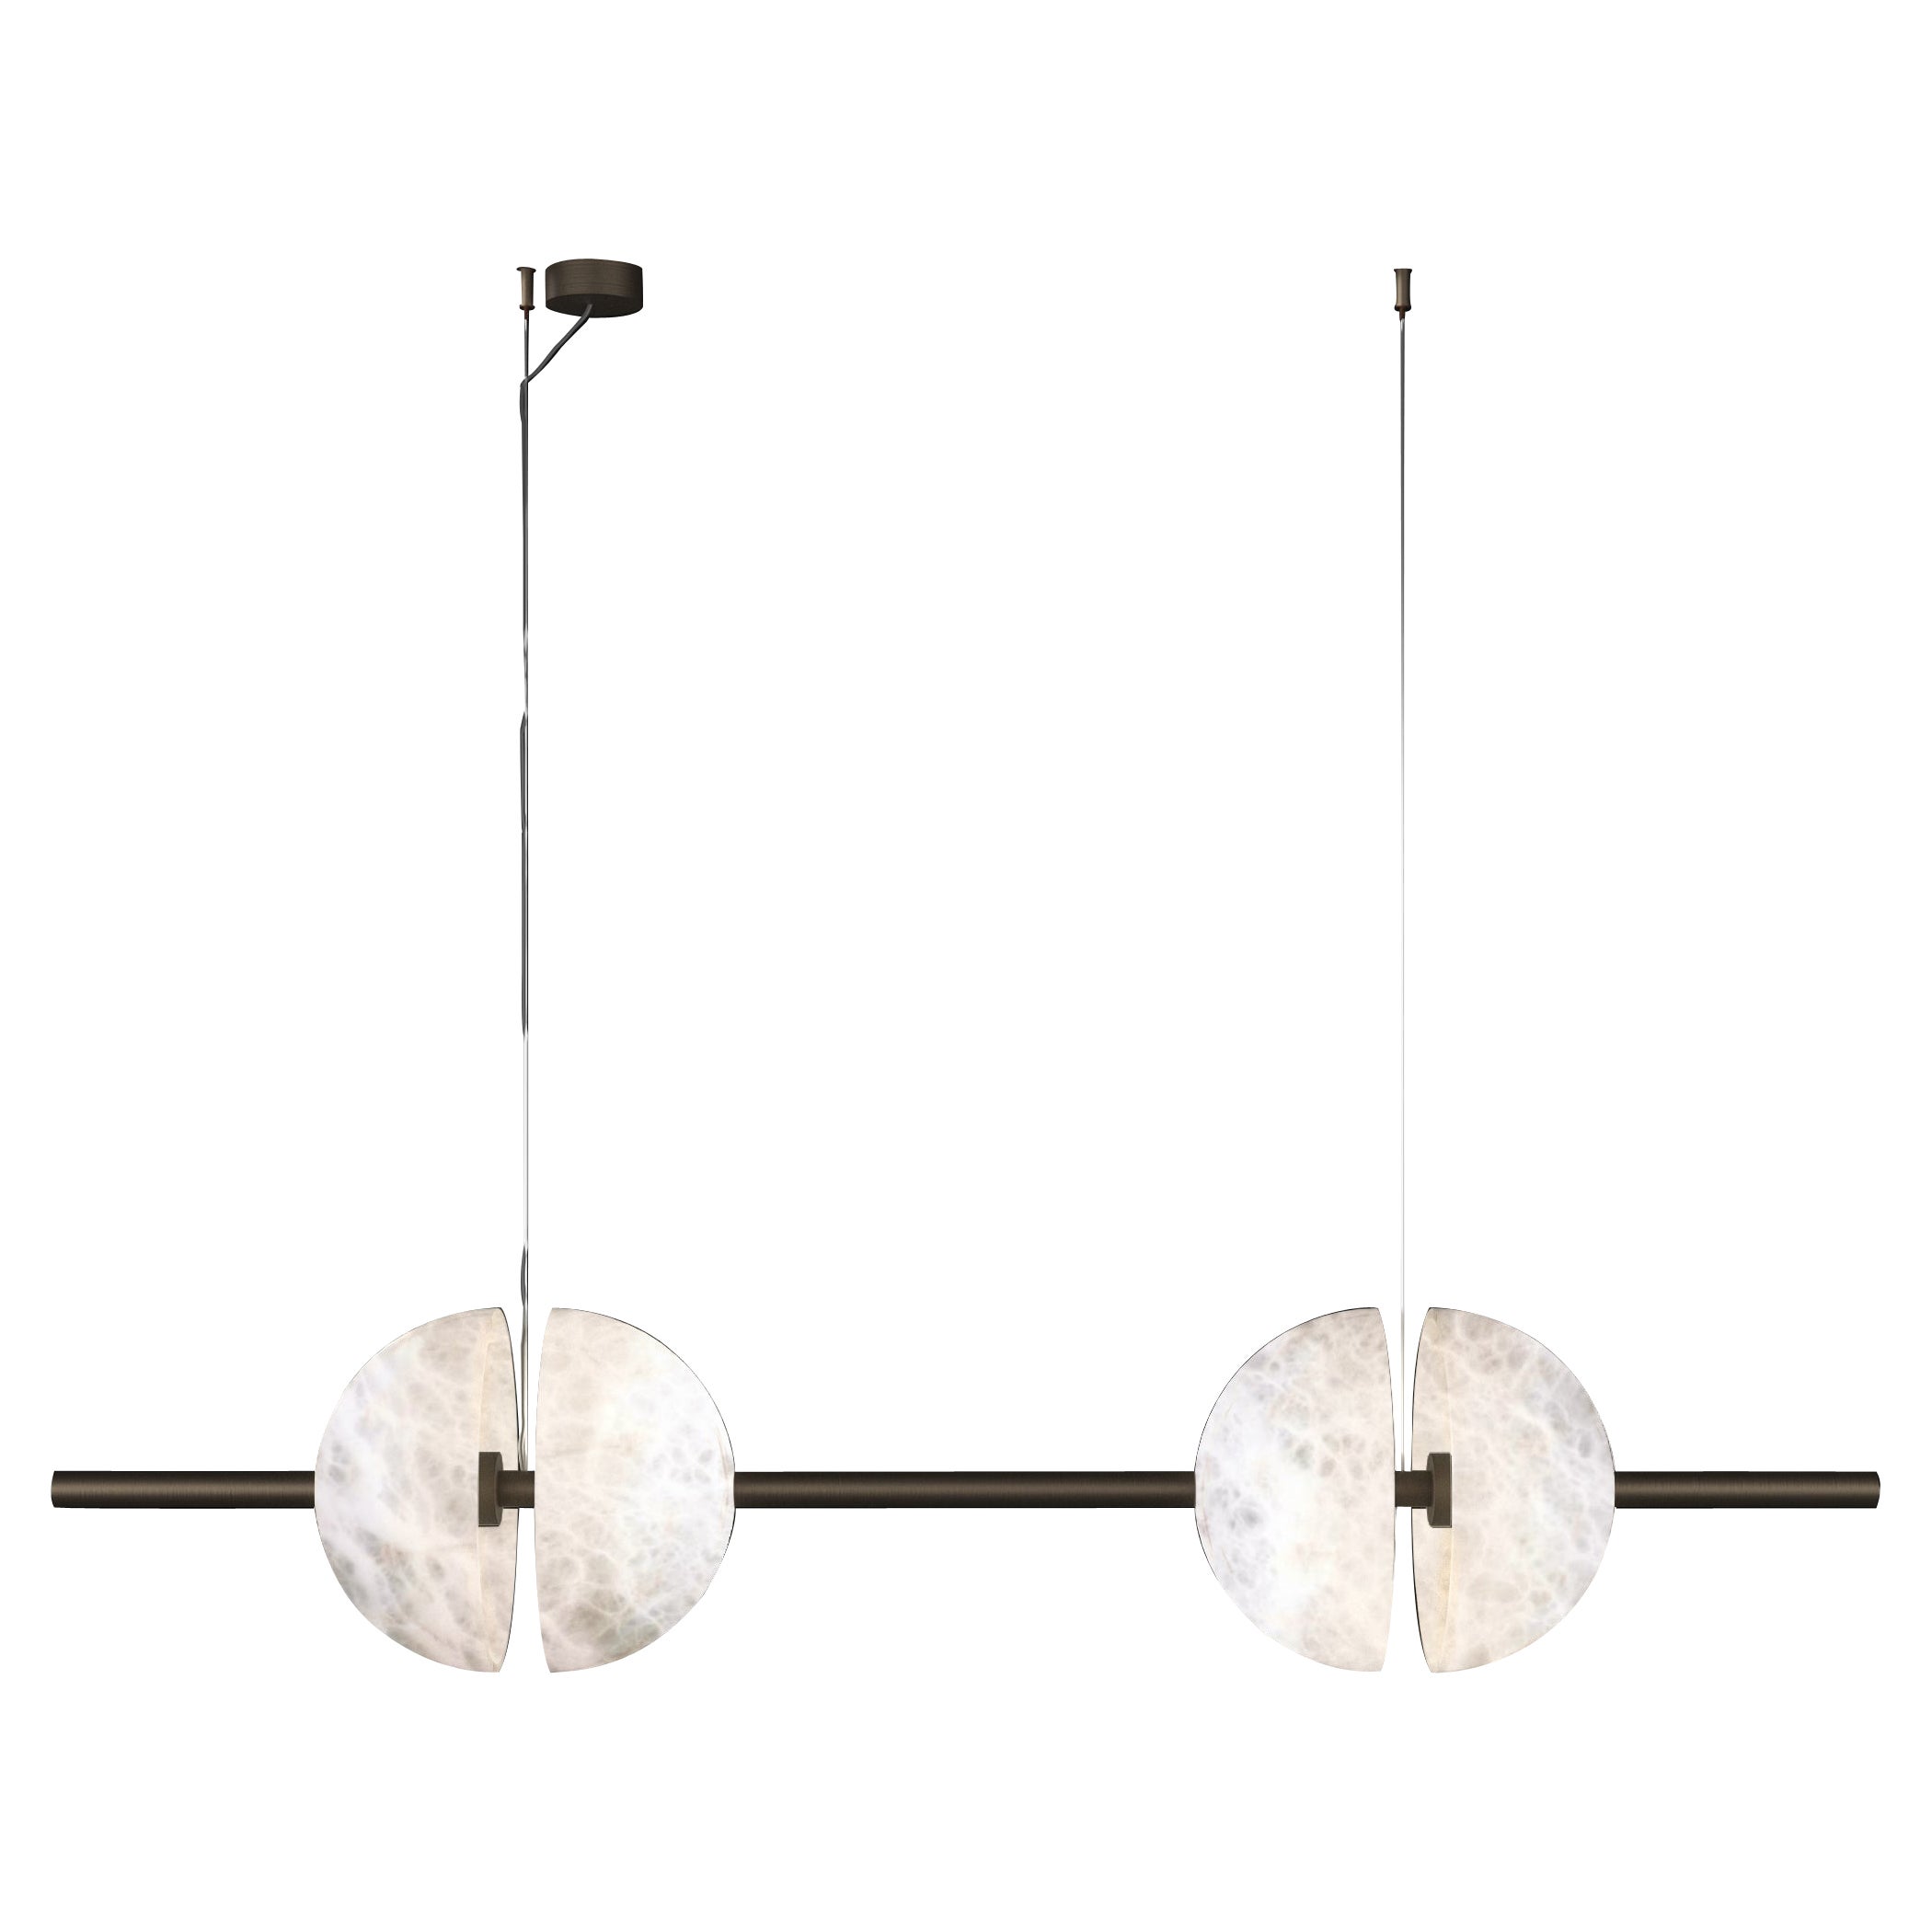 Ermes Burnished Metal And Alabaster Pendant Light 1 by Alabastro Italiano For Sale